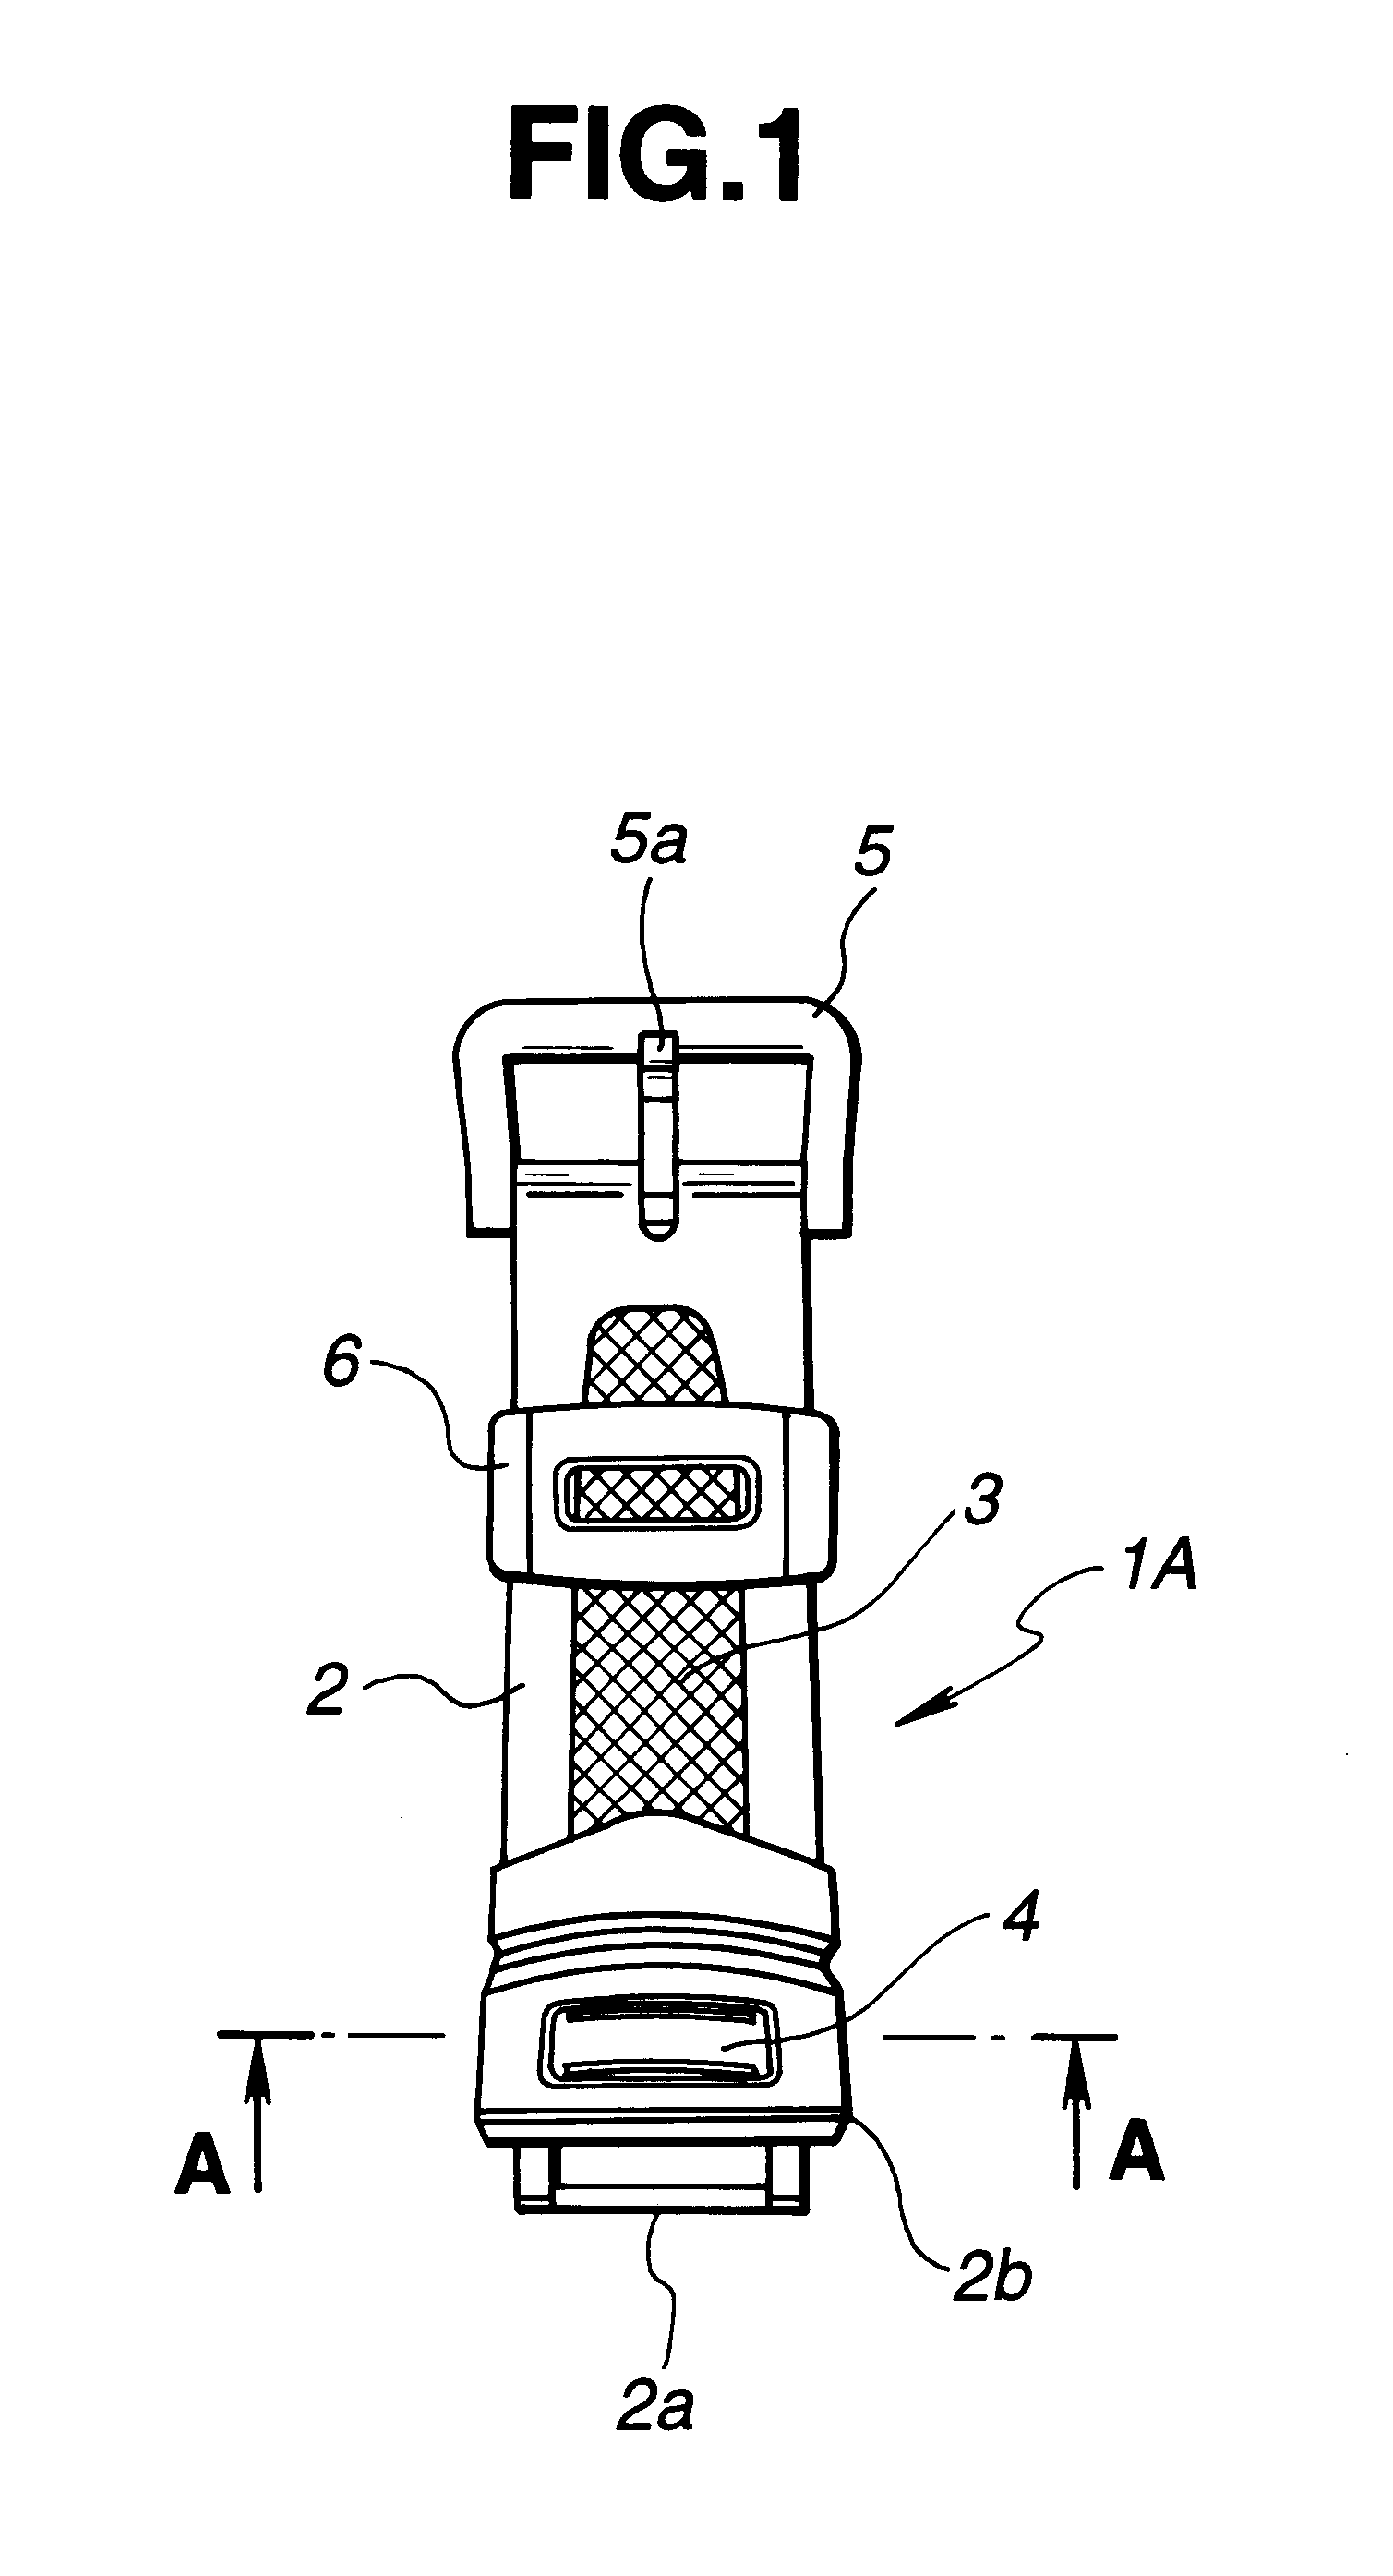 Band and wrist device